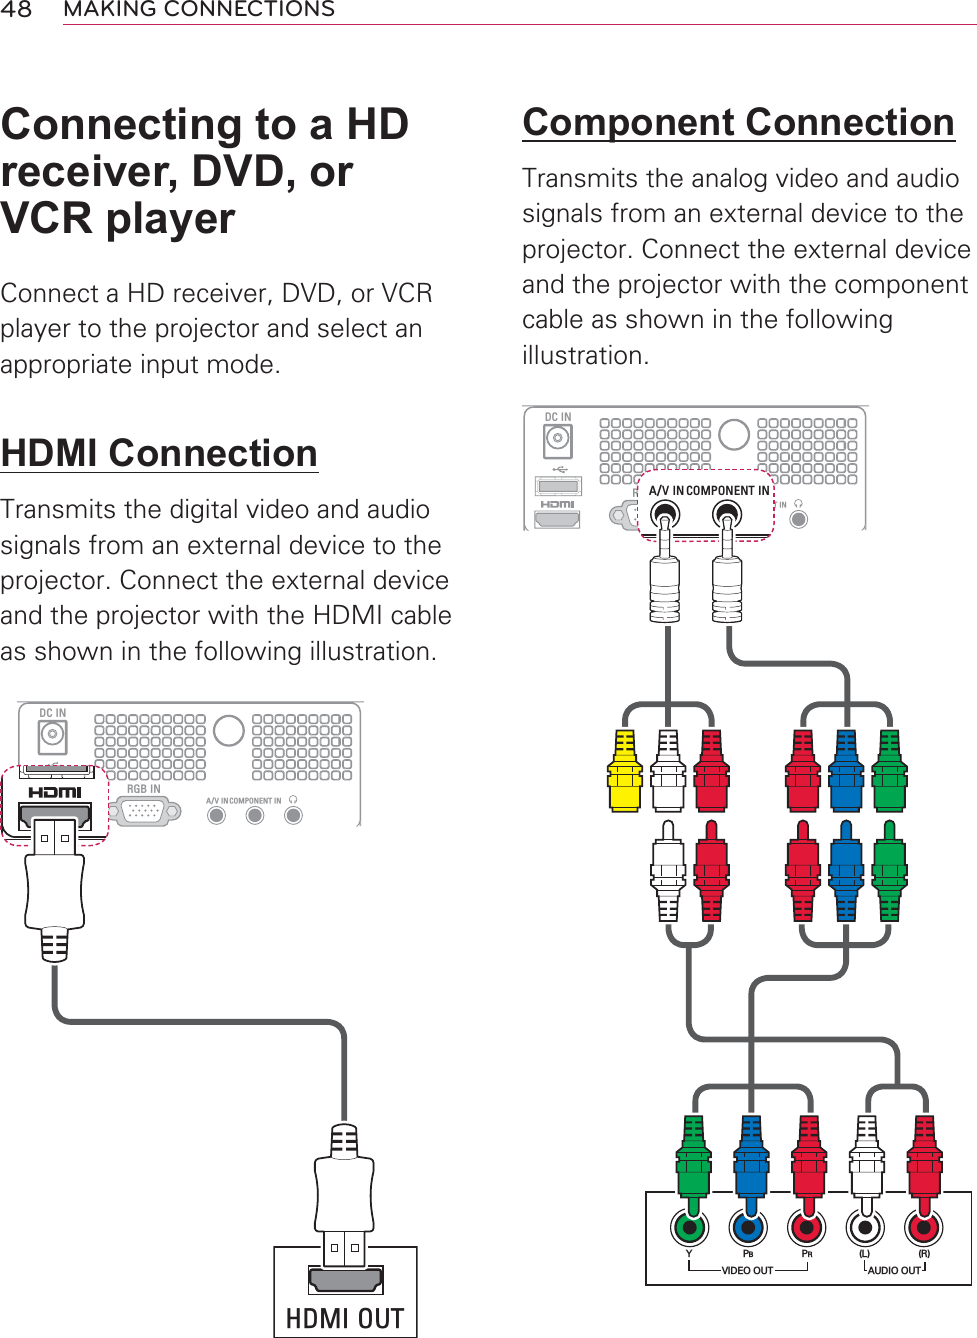 48 MAKING CONNECTIONSConnecting to a HD receiver, DVD, or VCR playerConnect a HD receiver, DVD, or VCR player to the projector and select an appropriate input mode. HDMI ConnectionTransmits the digital video and audio signals from an external device to the projector. Connect the external device and the projector with the HDMI cable as shown in the following illustration.&apos;&amp;,15*%,1$9,1&amp;20321(17,1HDMI OUT Component ConnectionTransmits the analog video and audio signals from an external device to the projector. Connect the external device and the projector with the component cable as shown in the following illustration.&apos;&amp;,15*%,1$9,1&amp;20321(17,1$9,1&amp;20321(17,1VIDEO OUT(L)YPBPR(R)AUDIO OUT